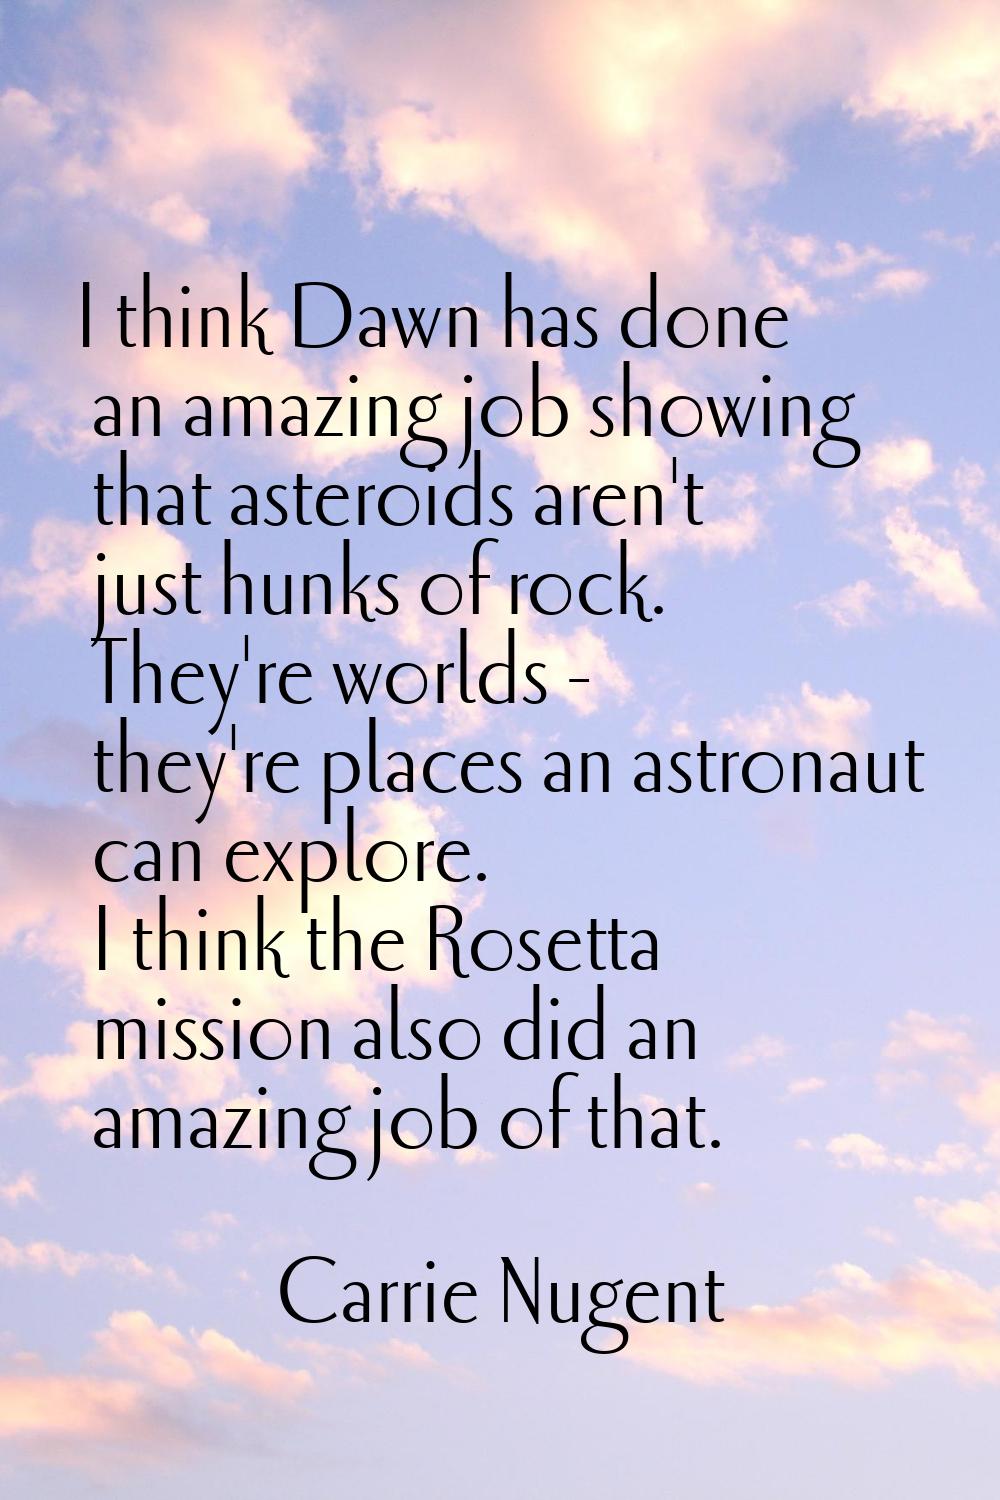 I think Dawn has done an amazing job showing that asteroids aren't just hunks of rock. They're worl